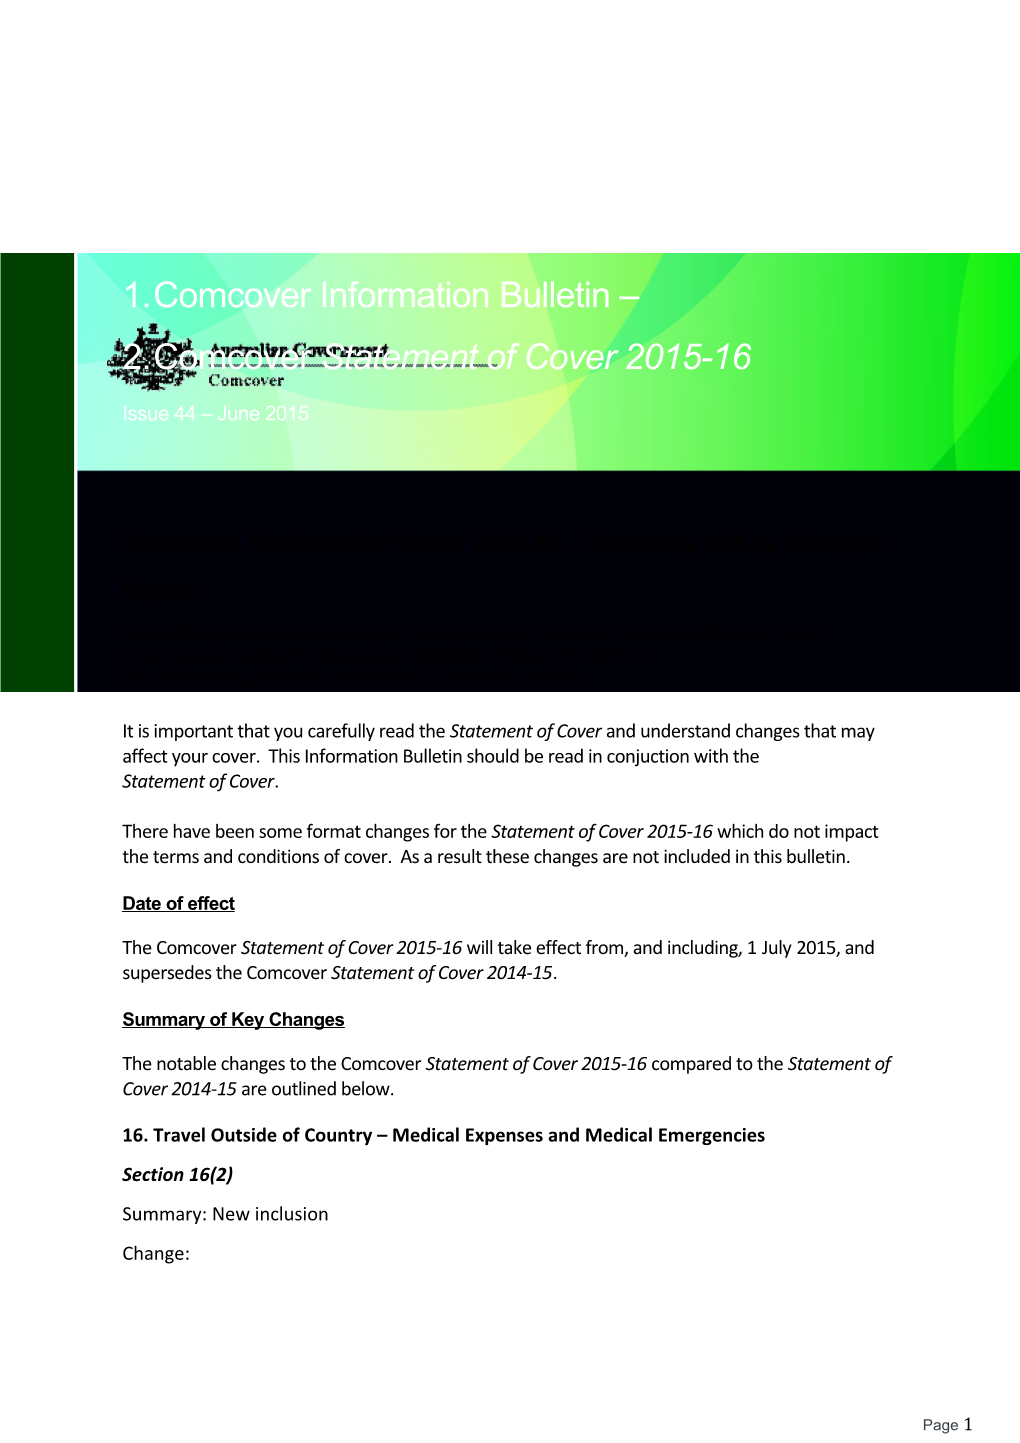 Comcover Information Bulletin - Issue 44 - June 2015